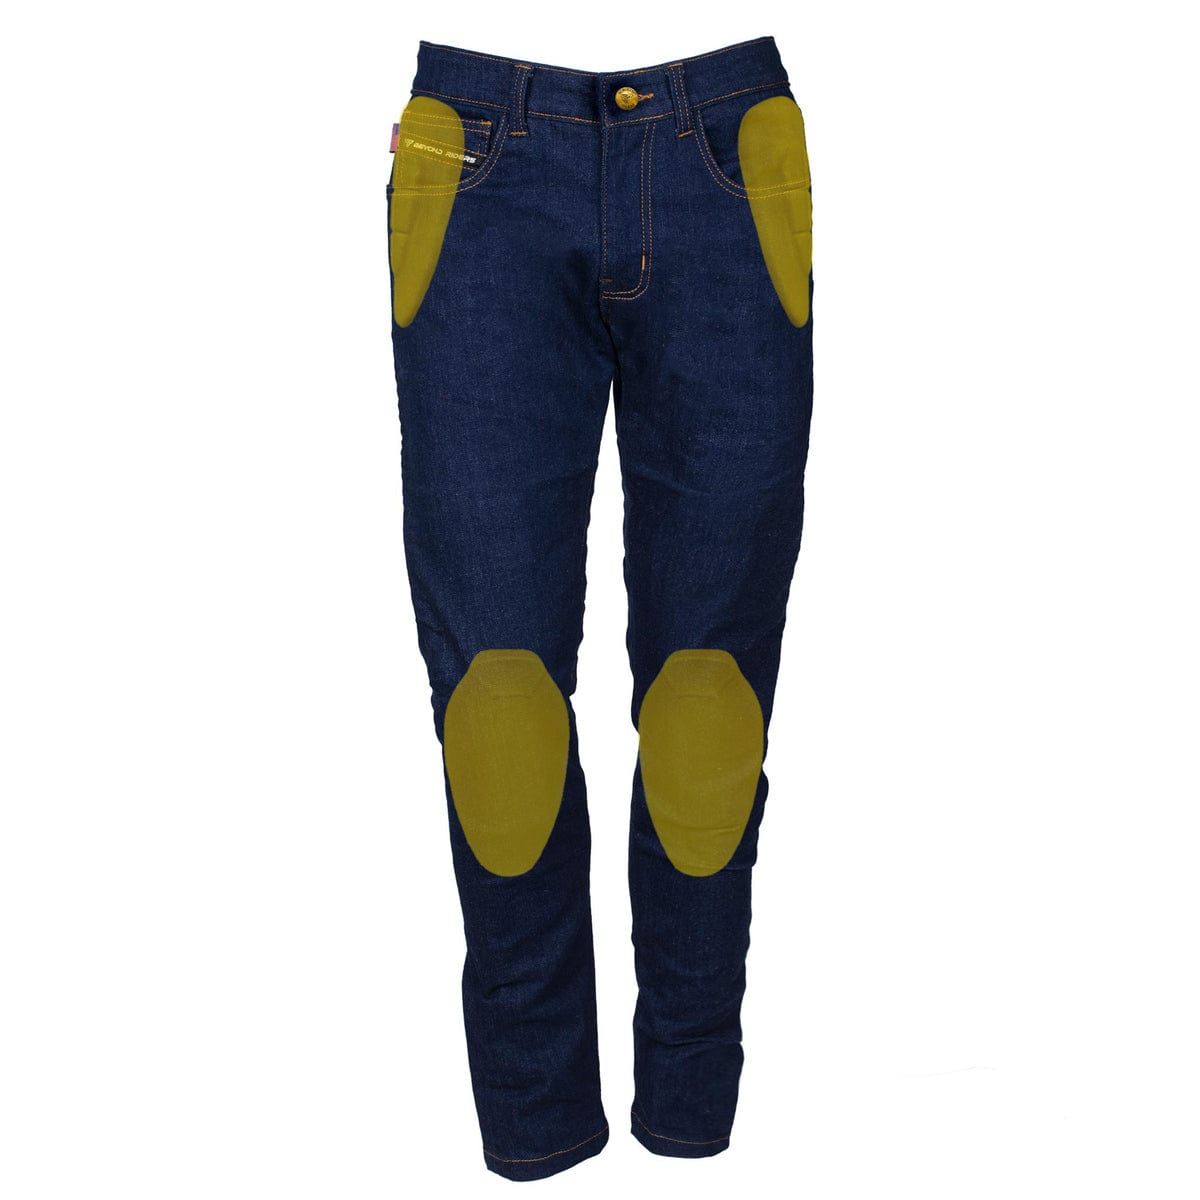 Protective Jeans - Blue - Level 1 Pads